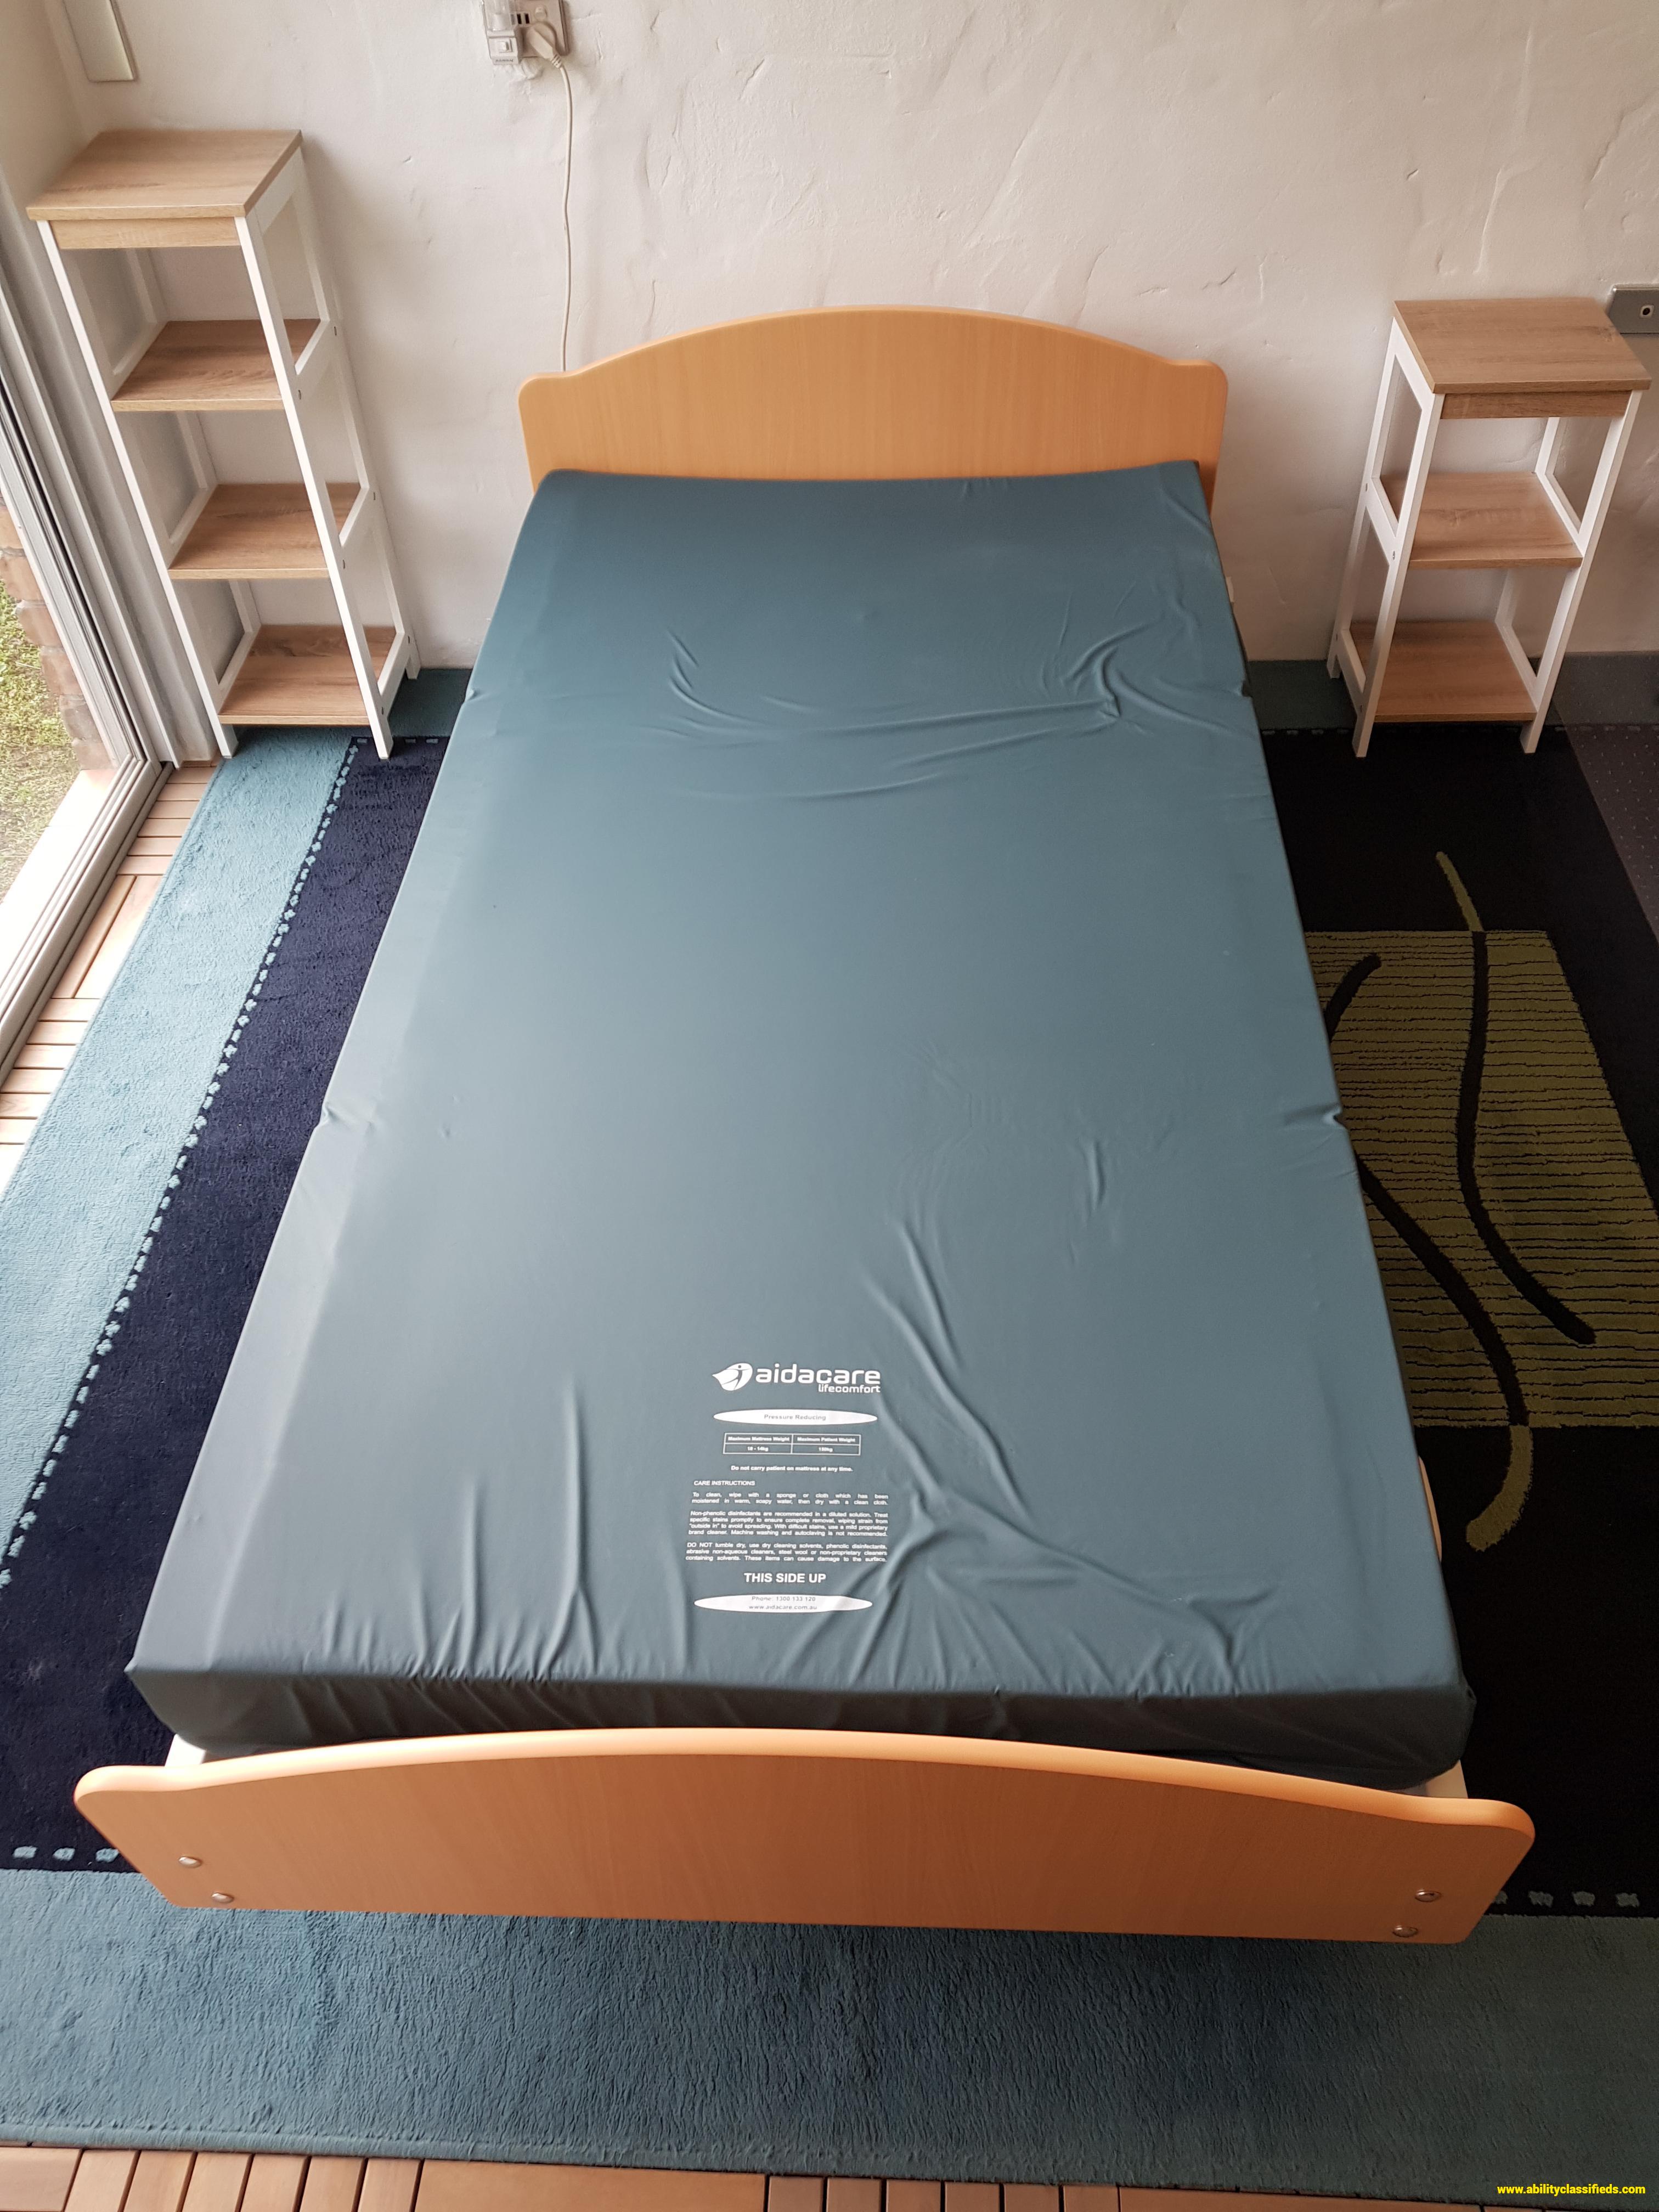 AIDACARE 3 FUNCTION HIGH/LOW AGED CARE BED + MATTRESS